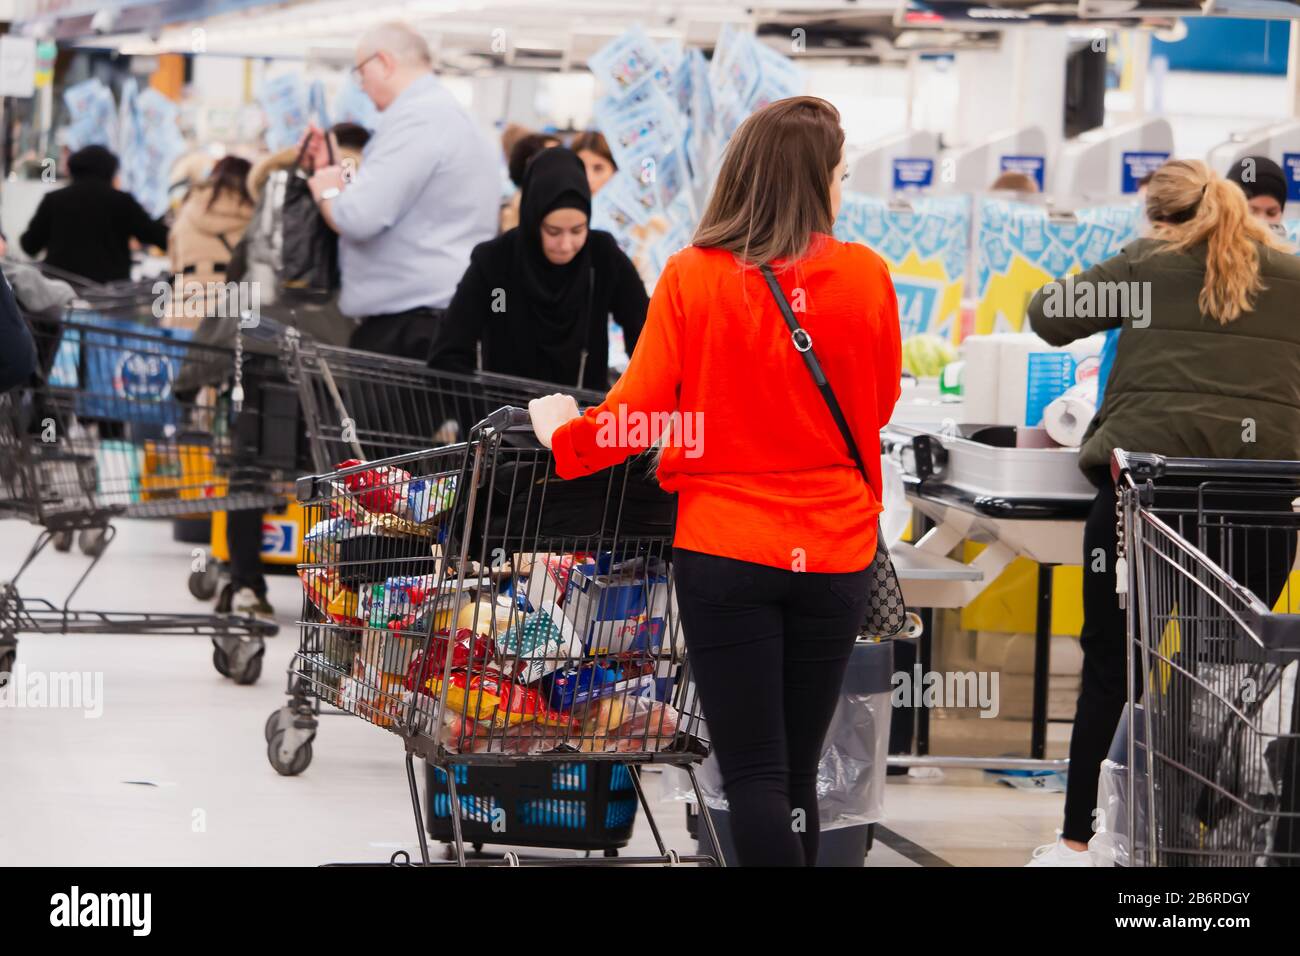 Ishoj, Denmark - March 12 2020: People rushing to supermarkets after in Denmark was announced pandemic Stock Photo